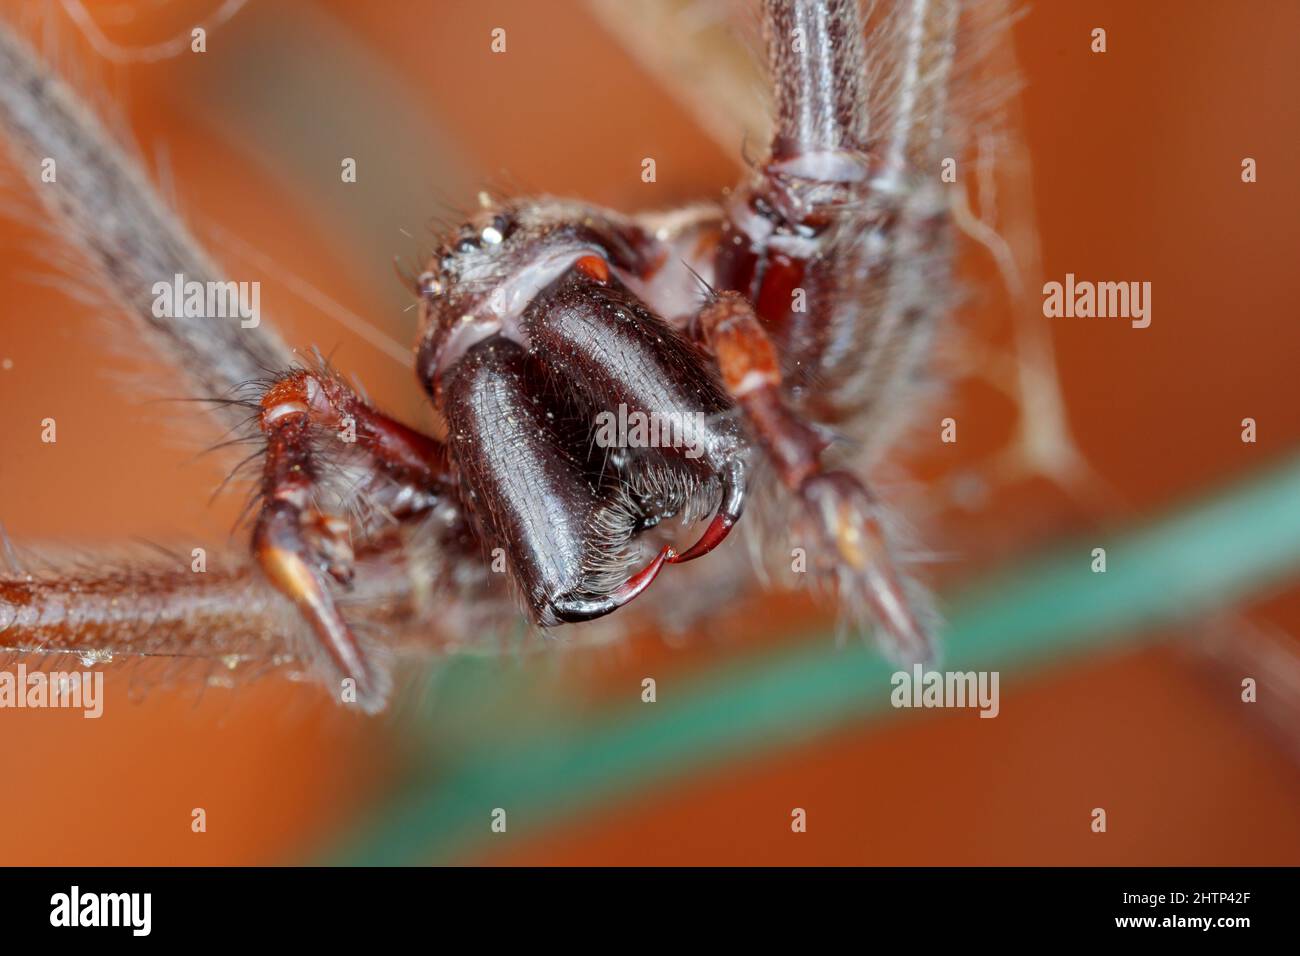 Close-up of the jaws of a house spider. Stock Photo